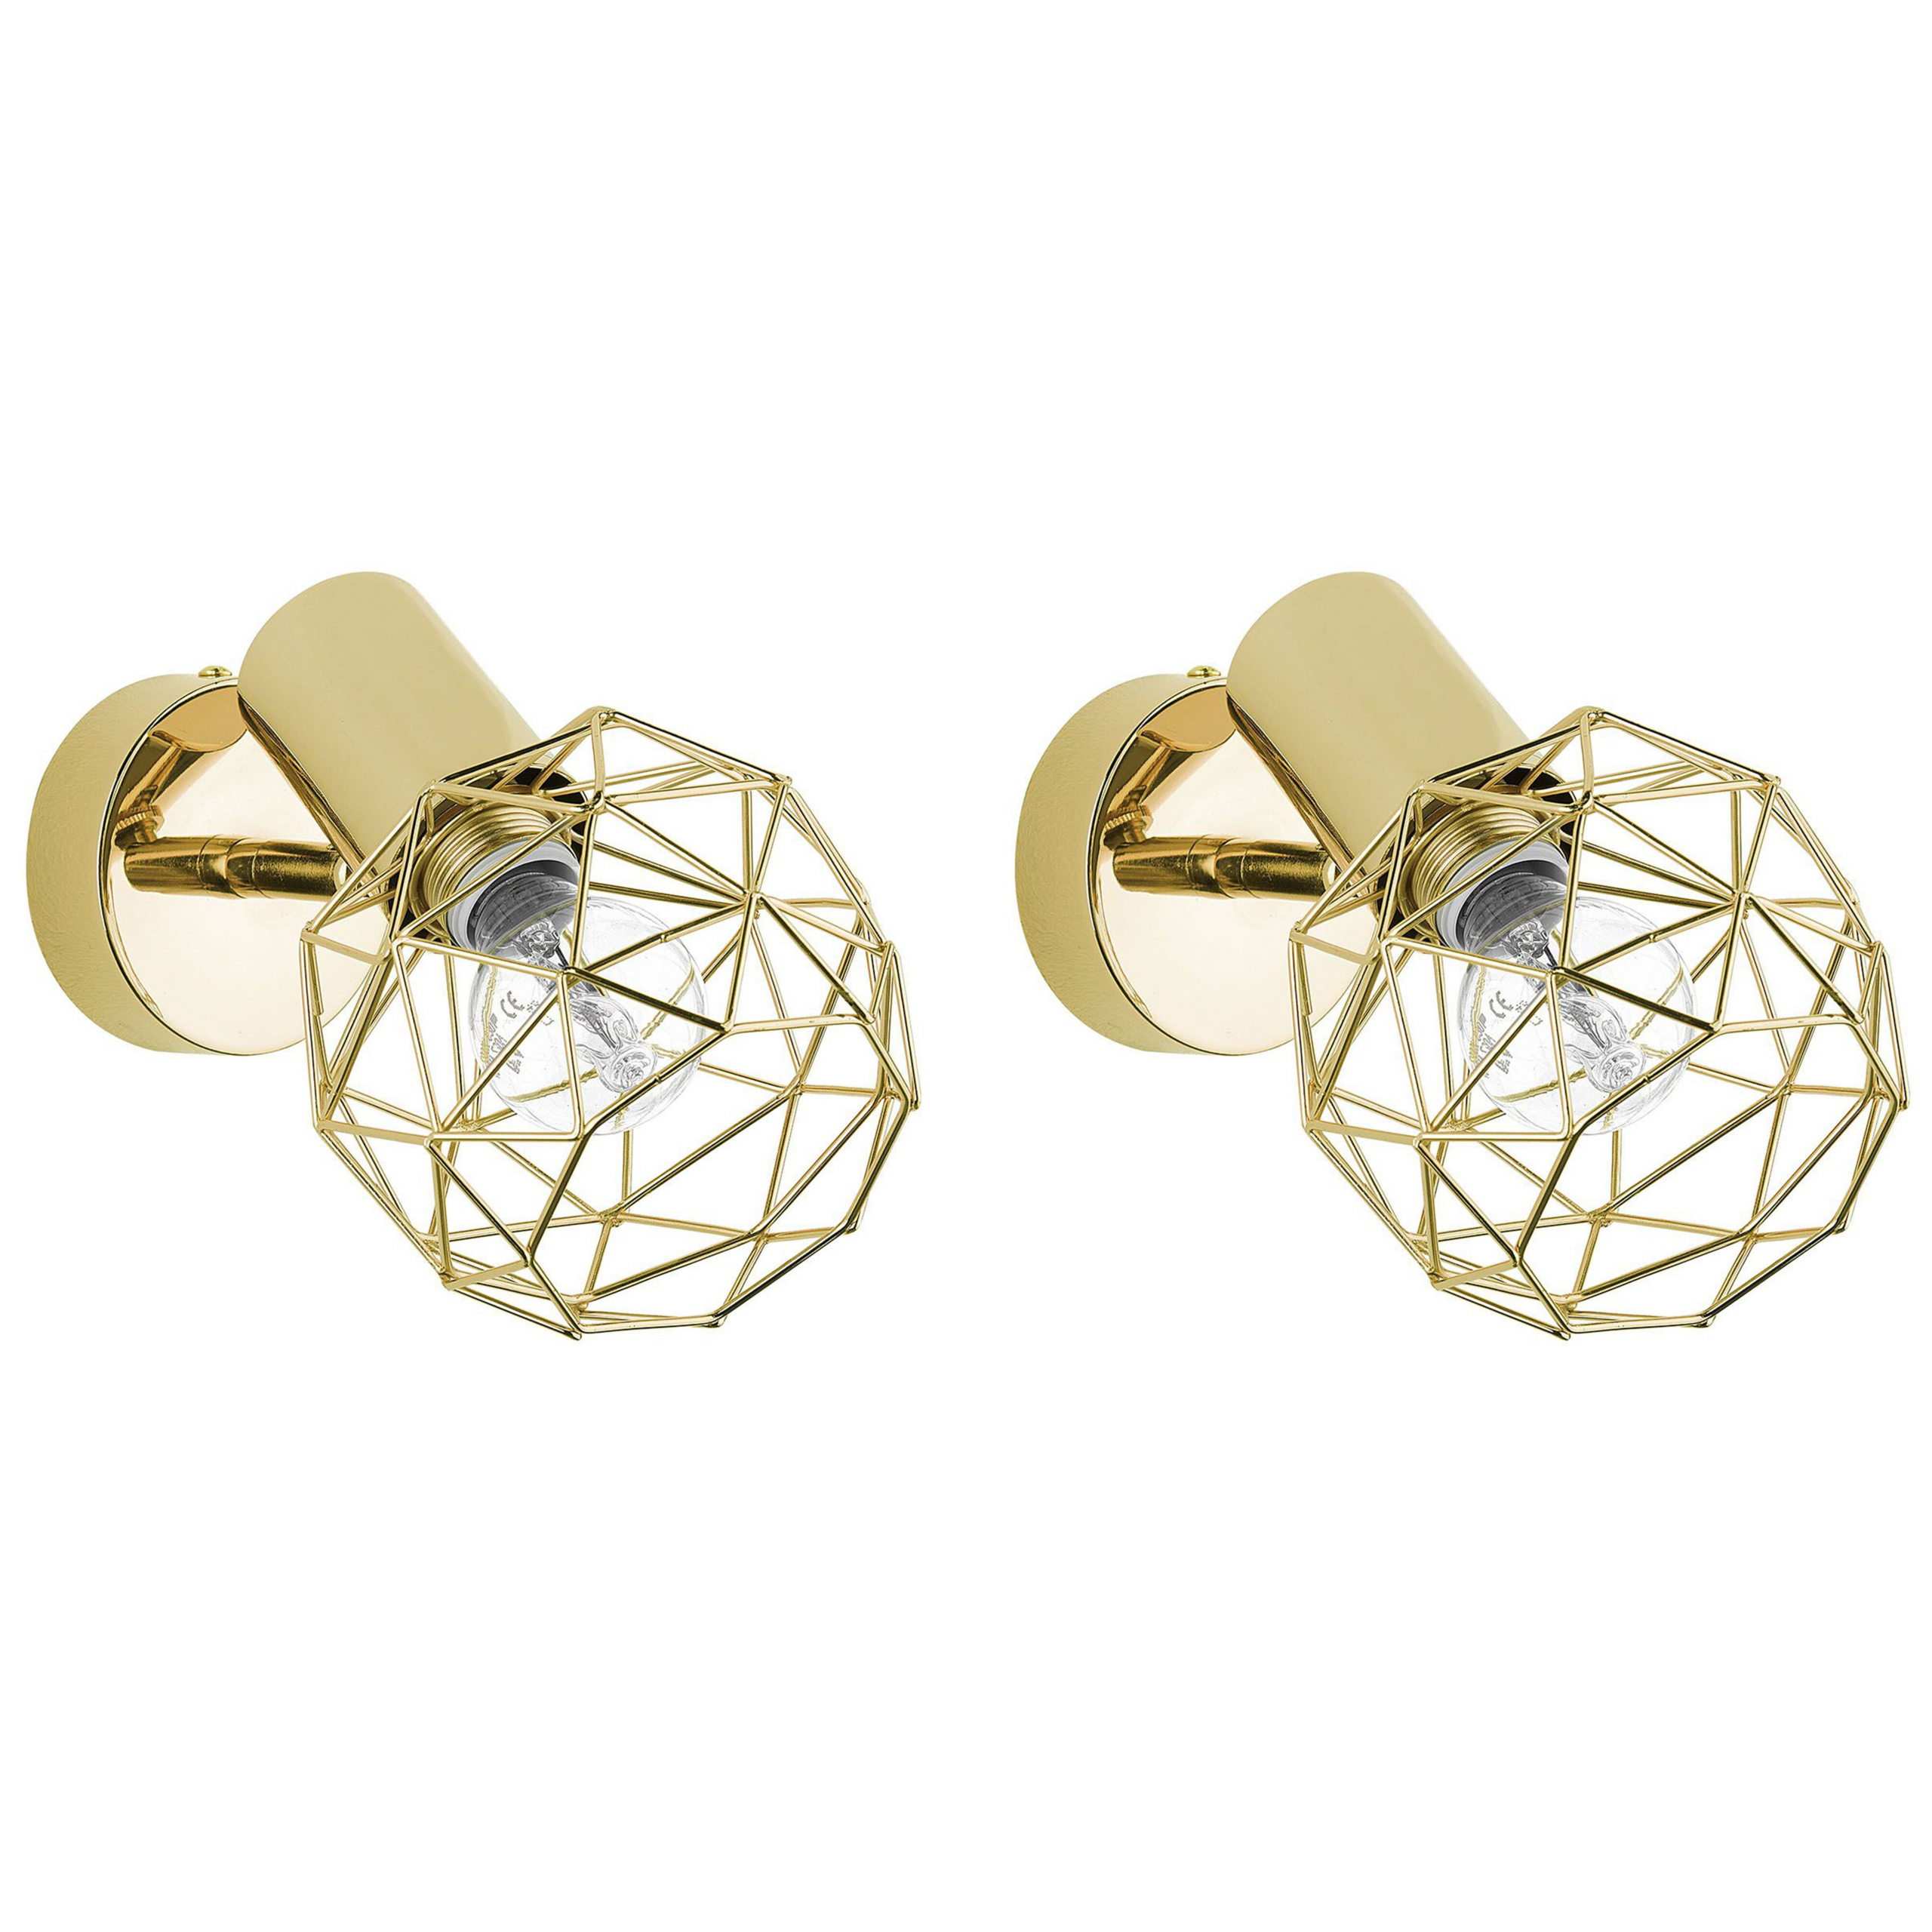 Beliani Set of 2 Wall Lamps Gold Metal Cage Shade Adjustable Light Position Modern Scones Glamour Style